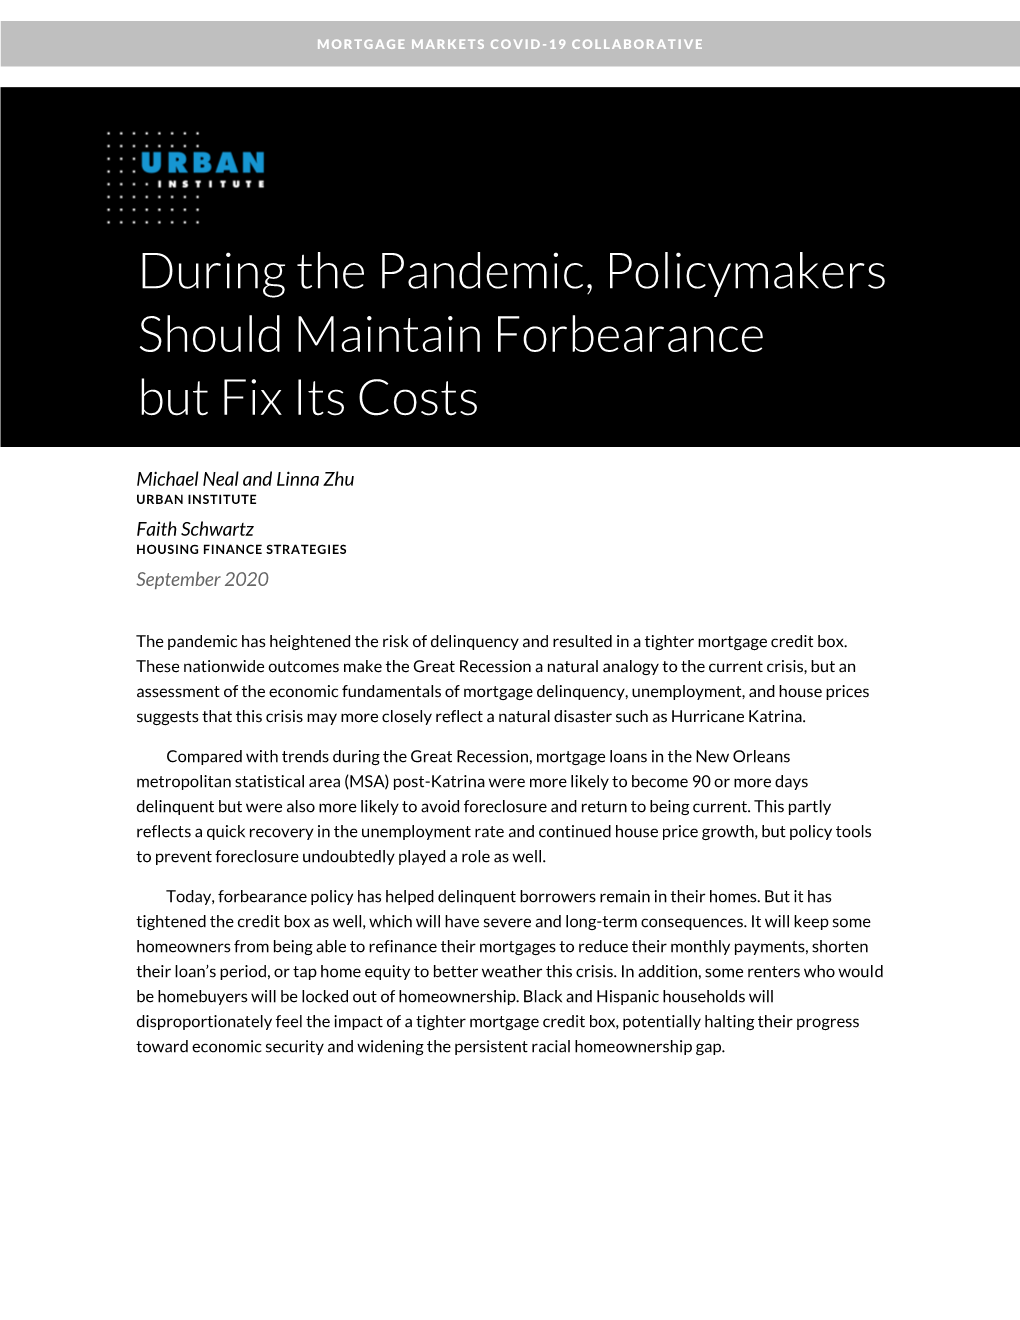 During the Pandemic, Poicymakers Should Maintain Forbearance But